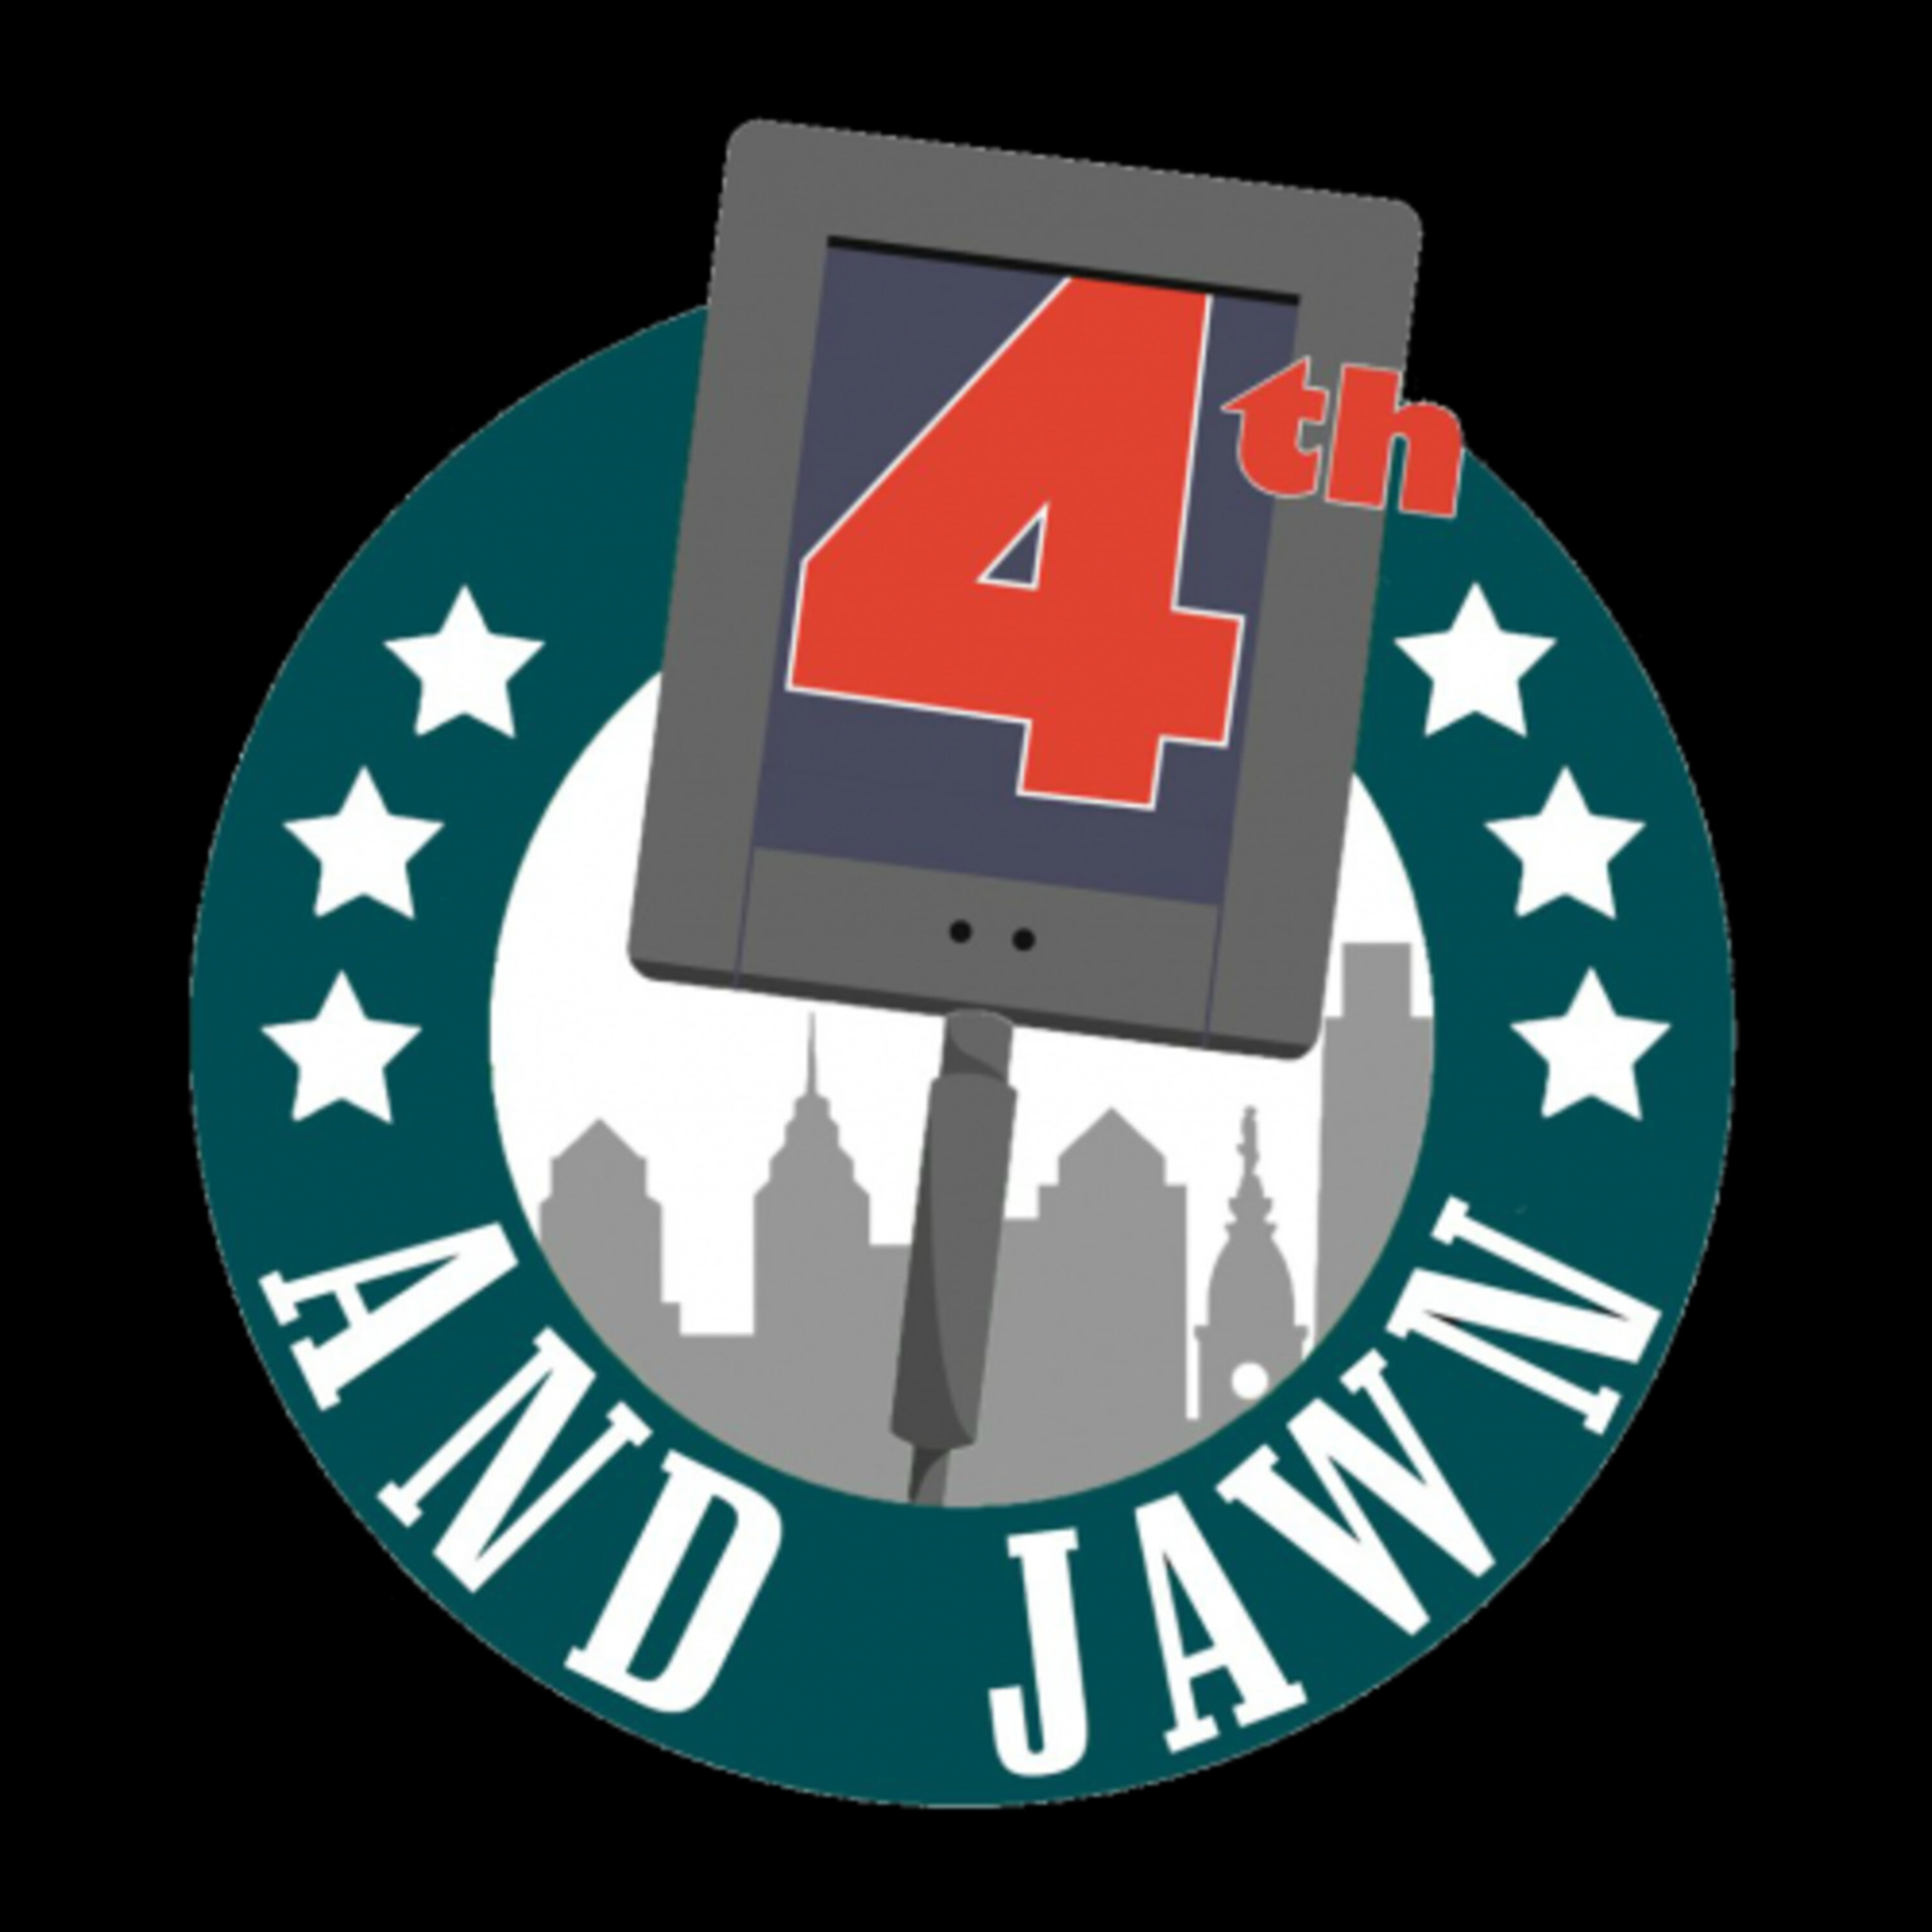 4th and JAWN – Episode 44: Eagles are in the SUPER BOWL!